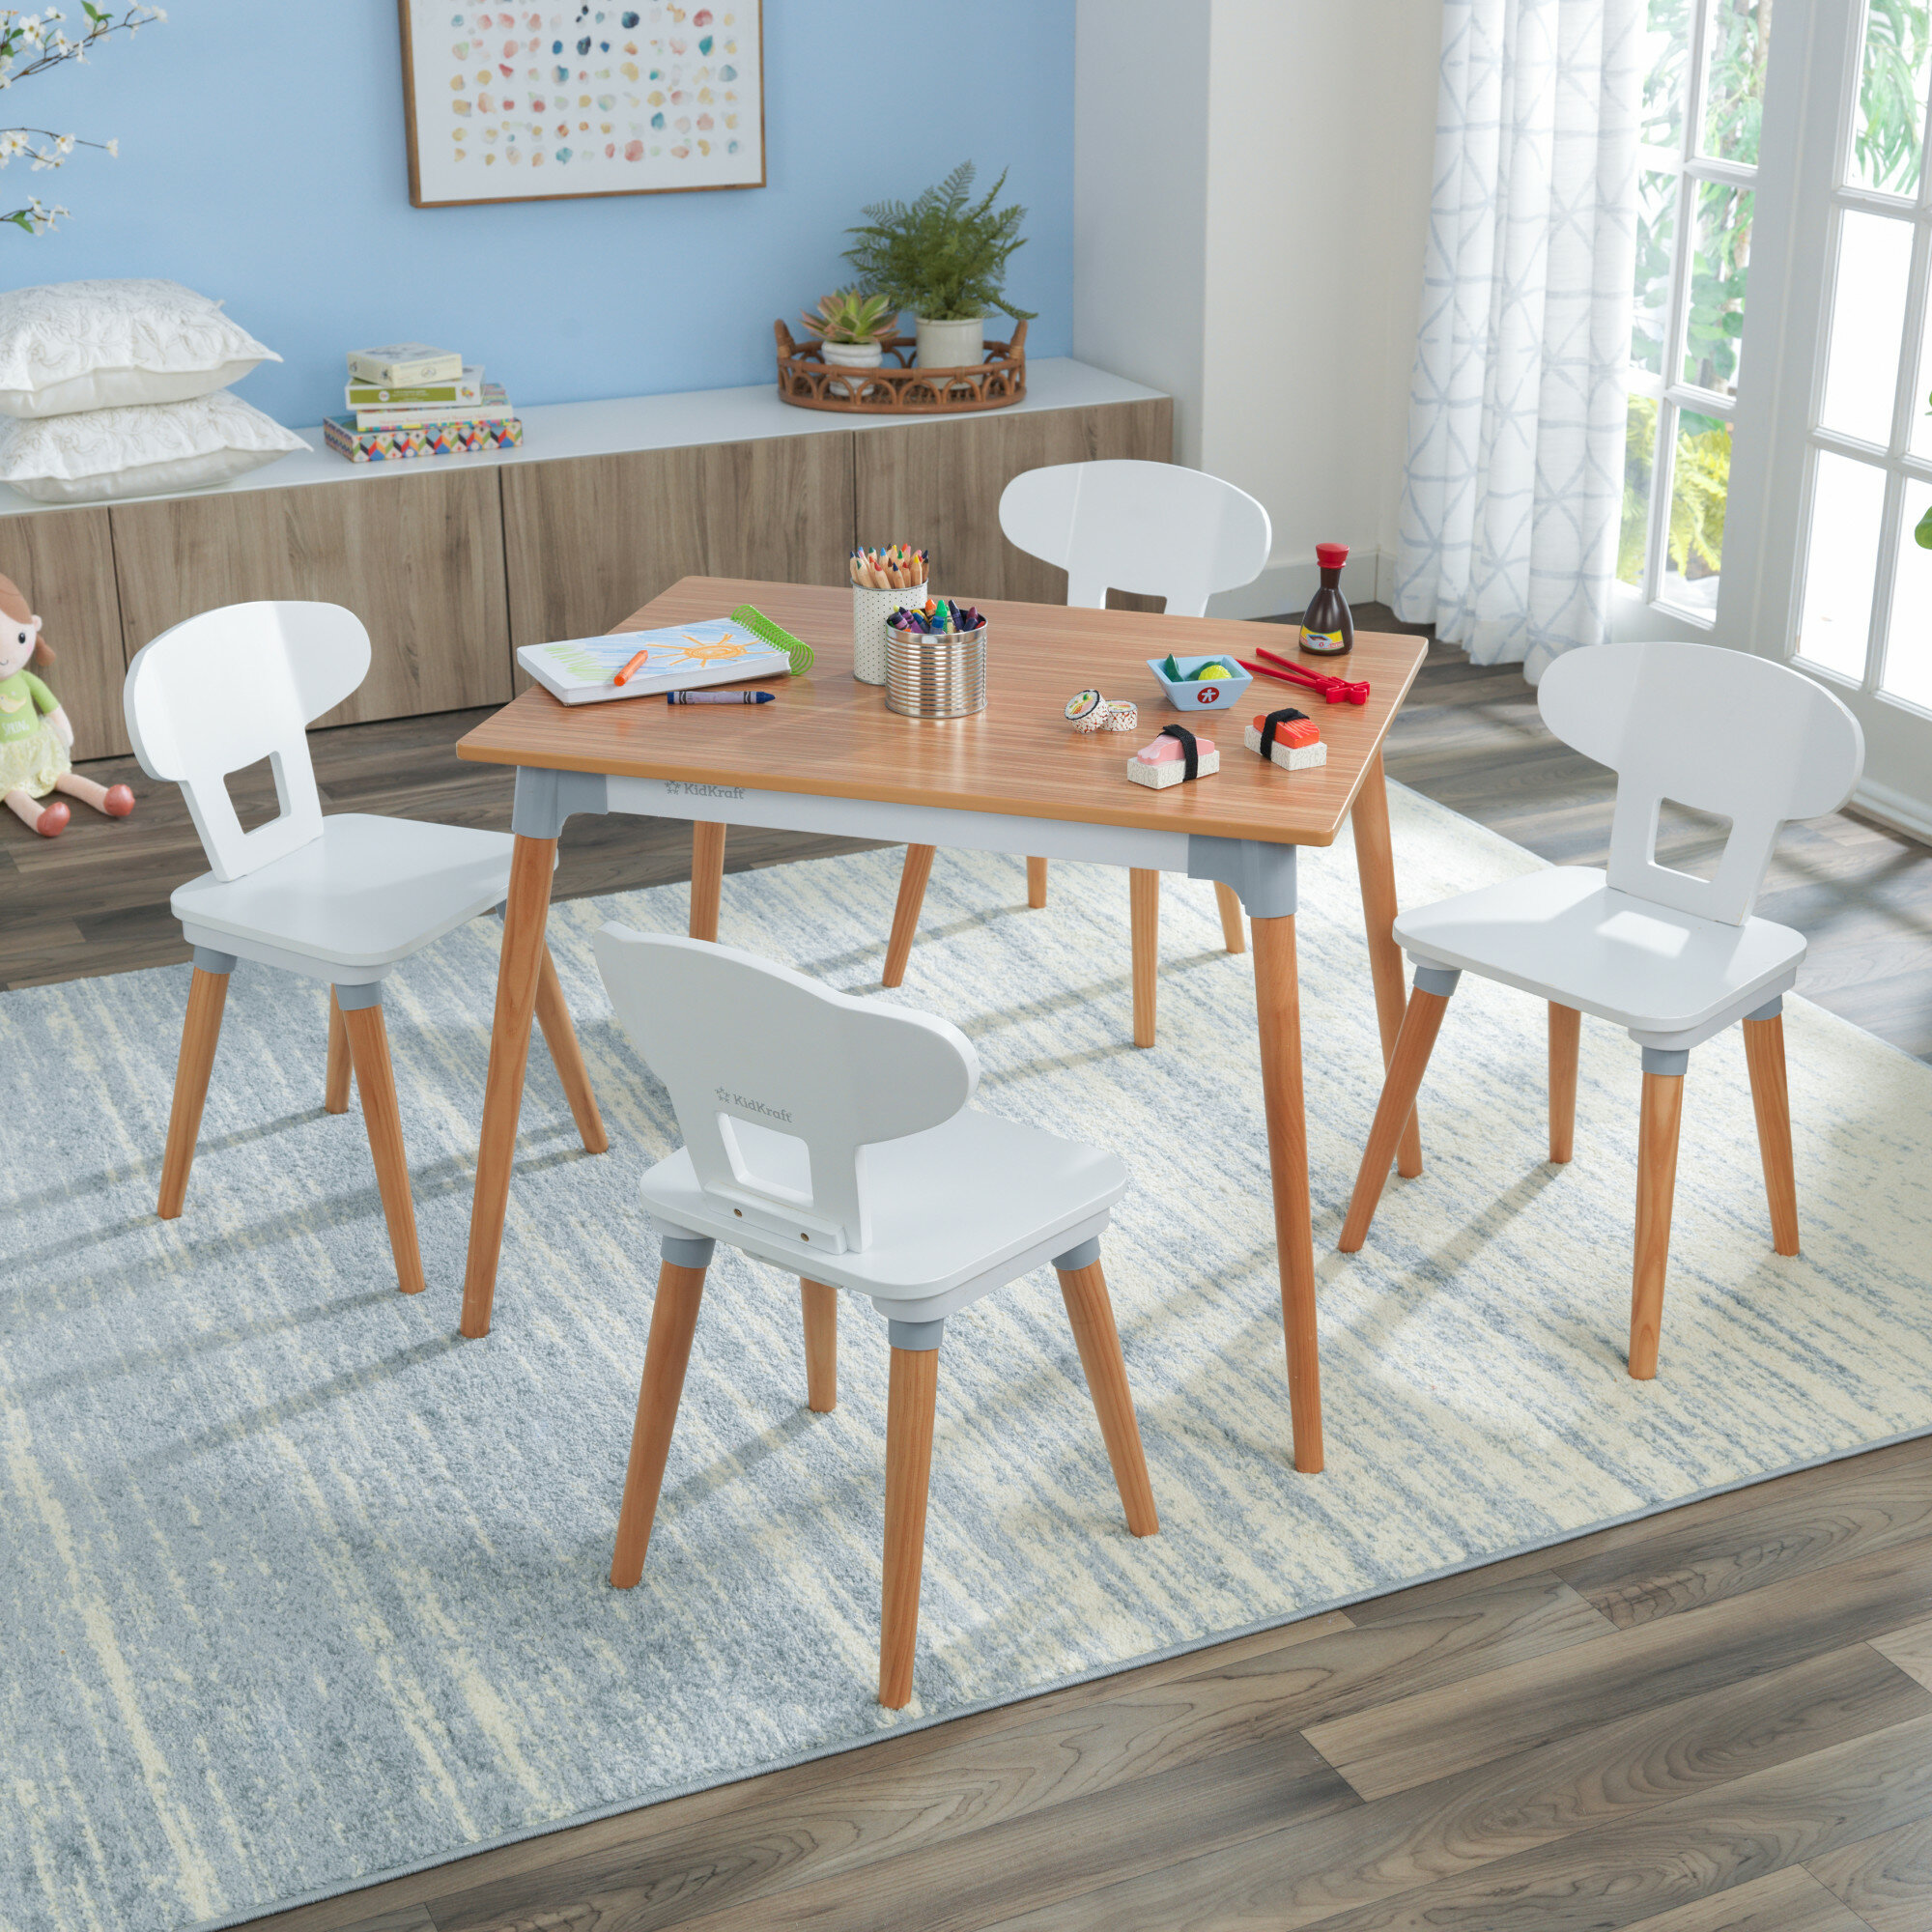 Kidkraft 26166 Round Table and Chair Set White/gray for sale online 